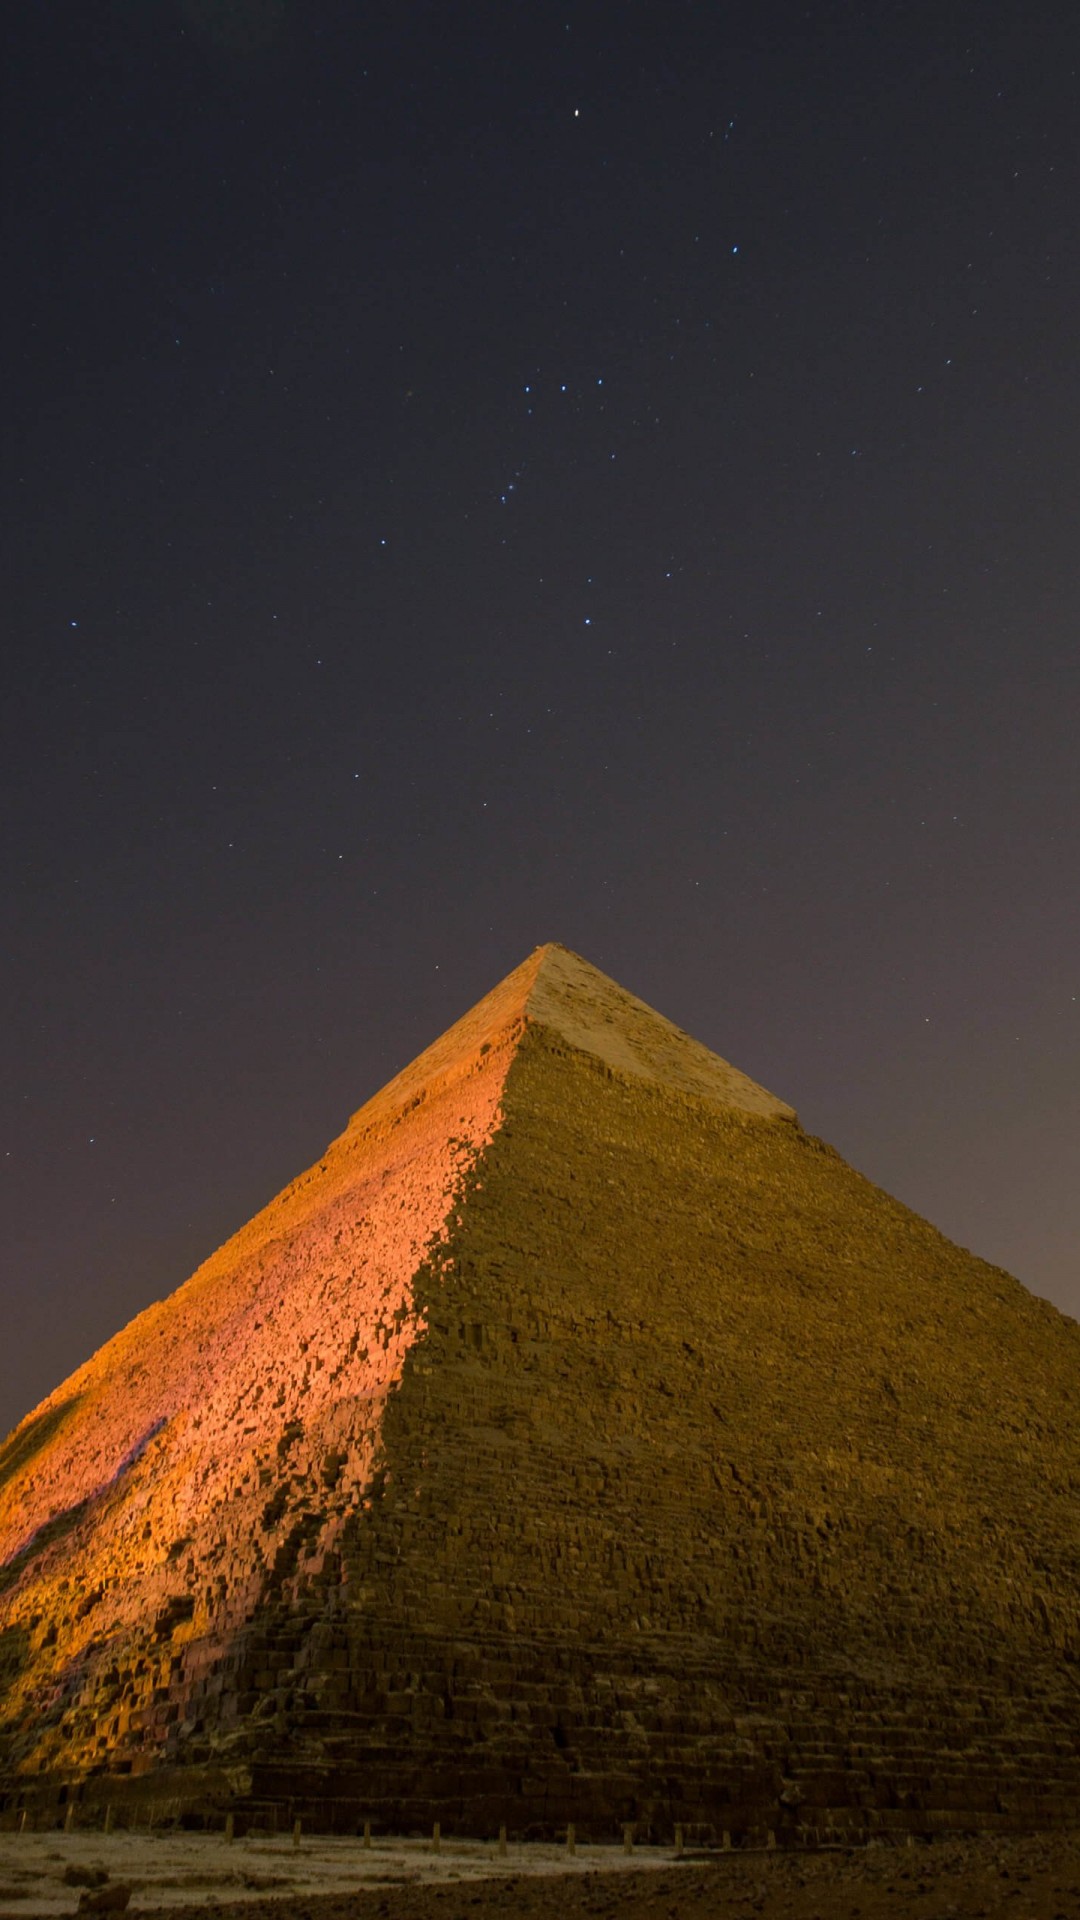 Pyramid by Night Wallpaper for SAMSUNG Galaxy Note 3